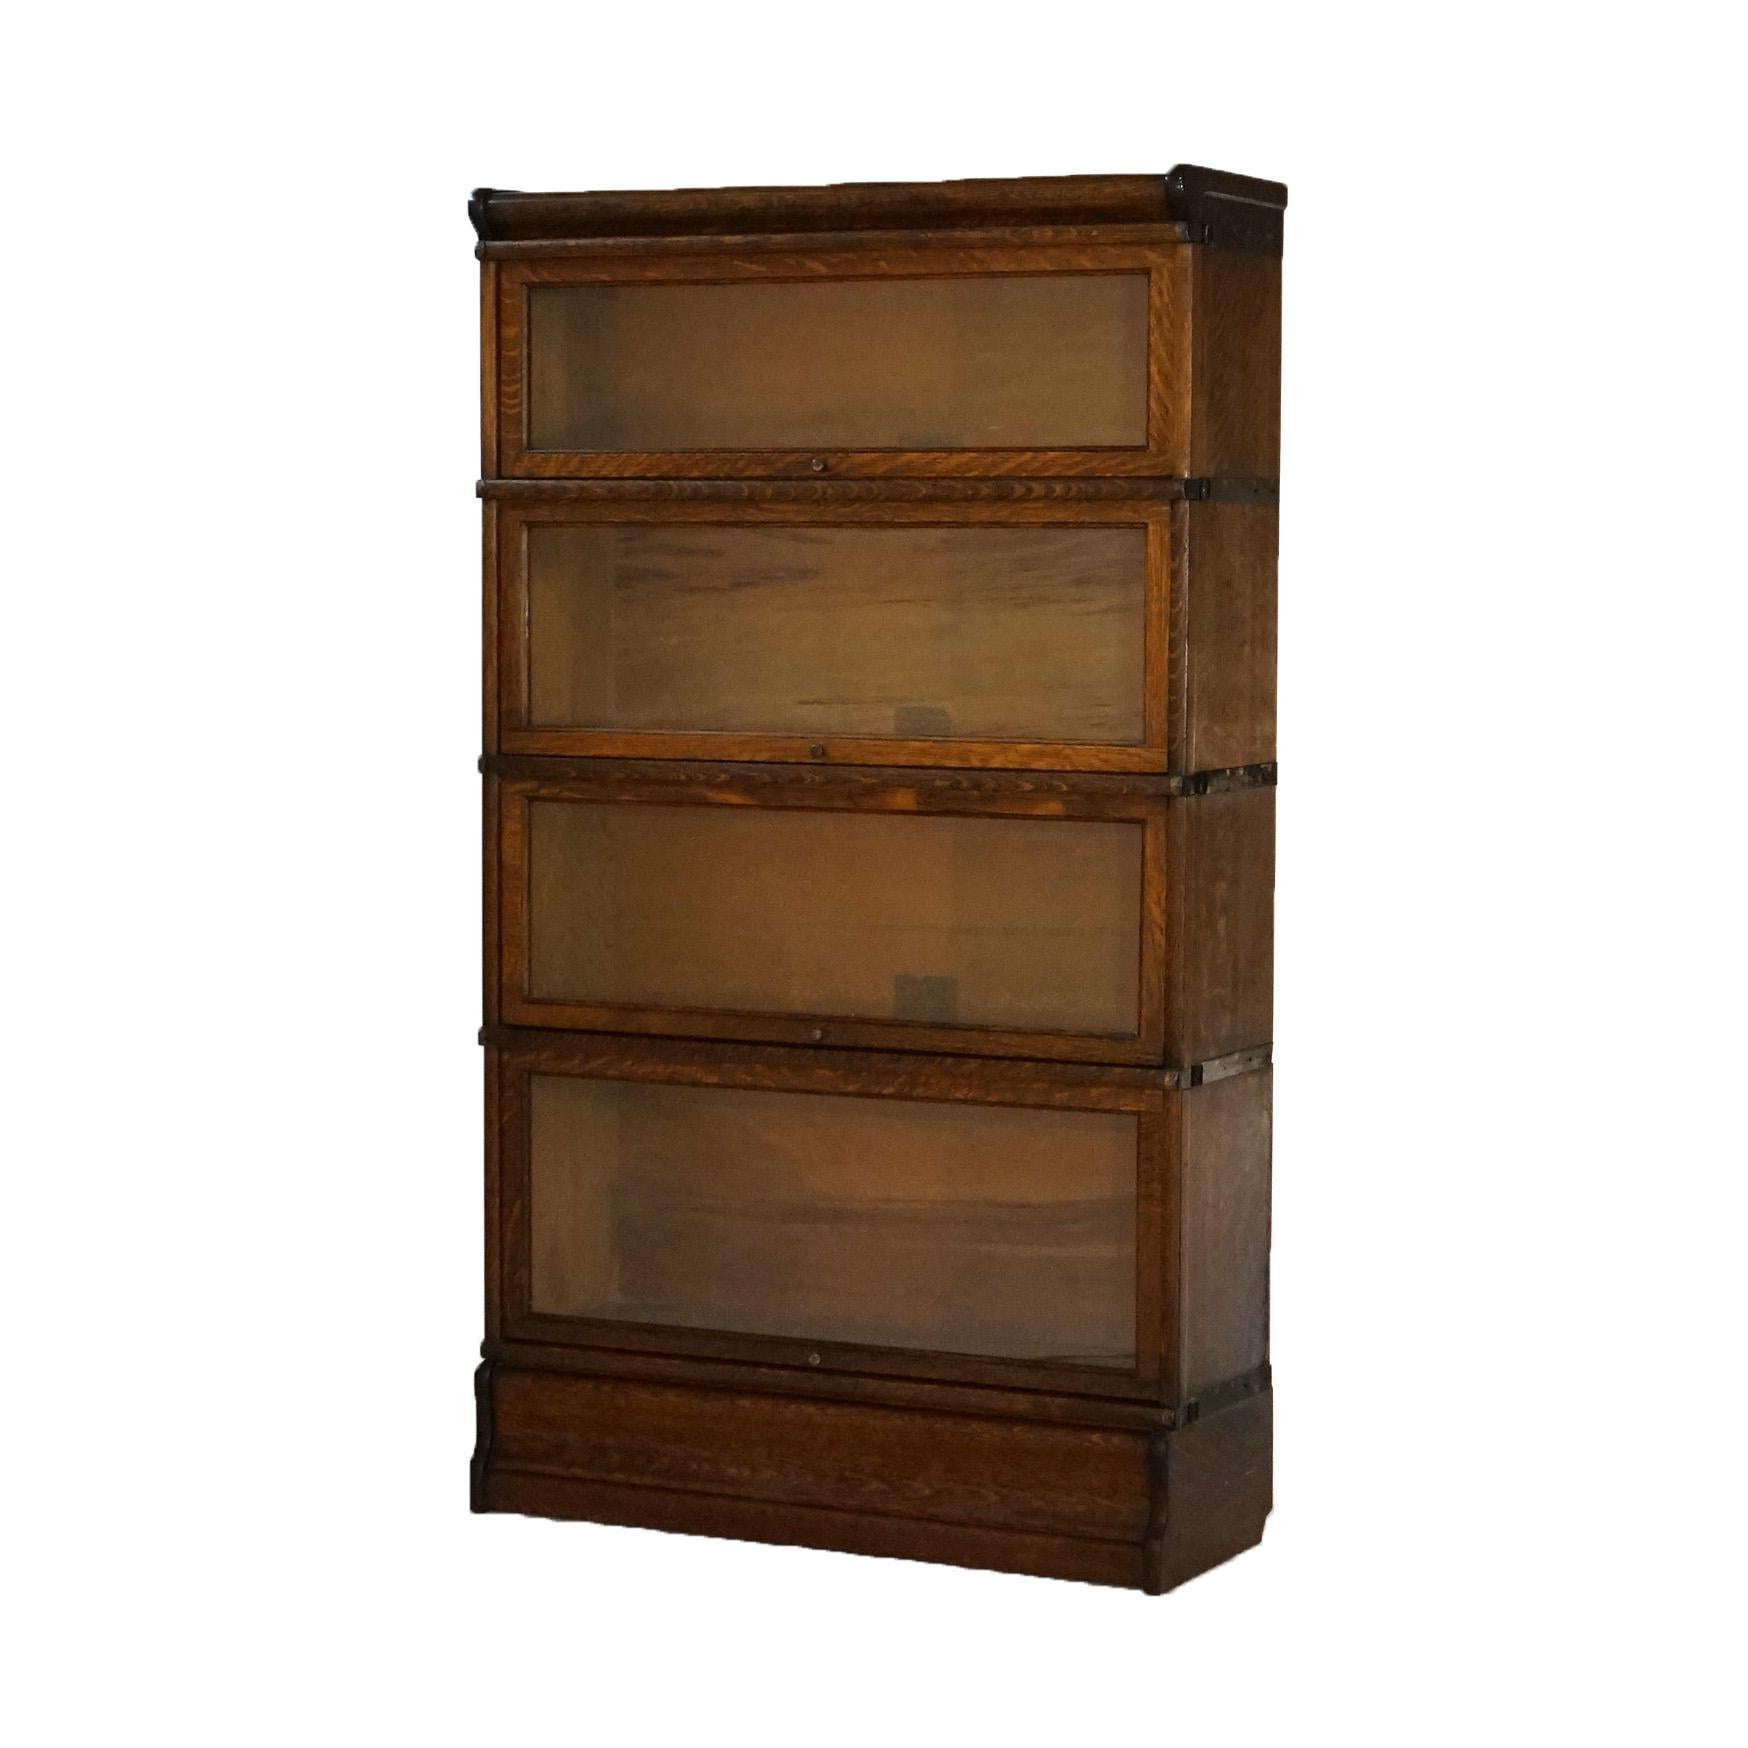 ***Ask About Reduced In-House Shipping Rates - Reliable Service & Fully Insured***
An antique Arts and Crafts barrister bookcase by Globe Wernicke offers oak construction with four stacks, each having pull out glass doors, raised on ogee base, maker